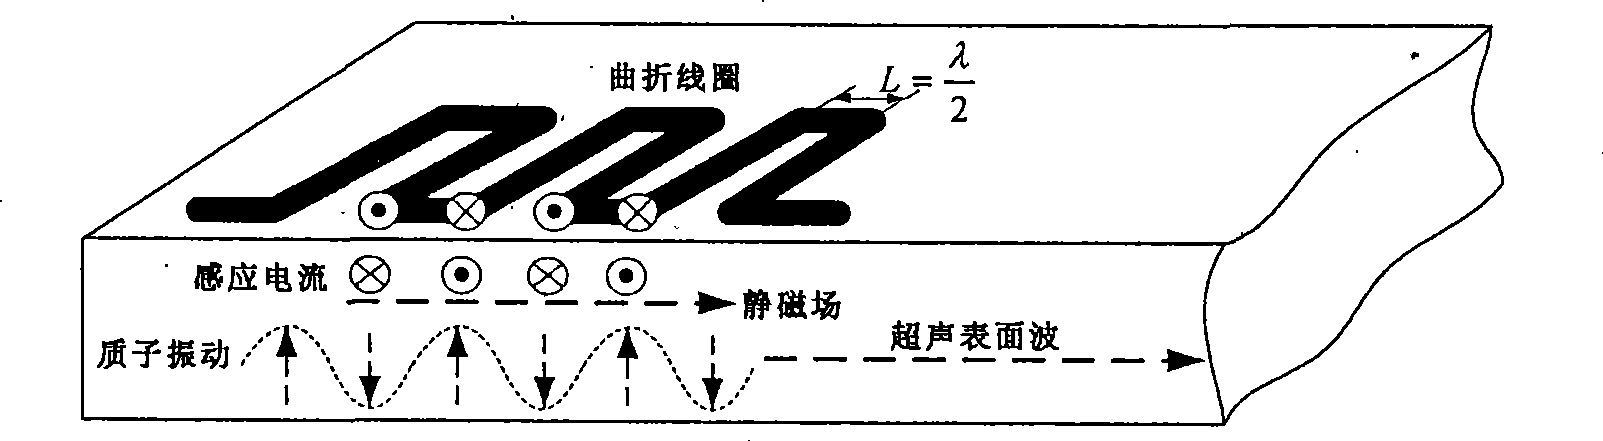 Rail tread defect rapid scanning and detecting method and device thereof